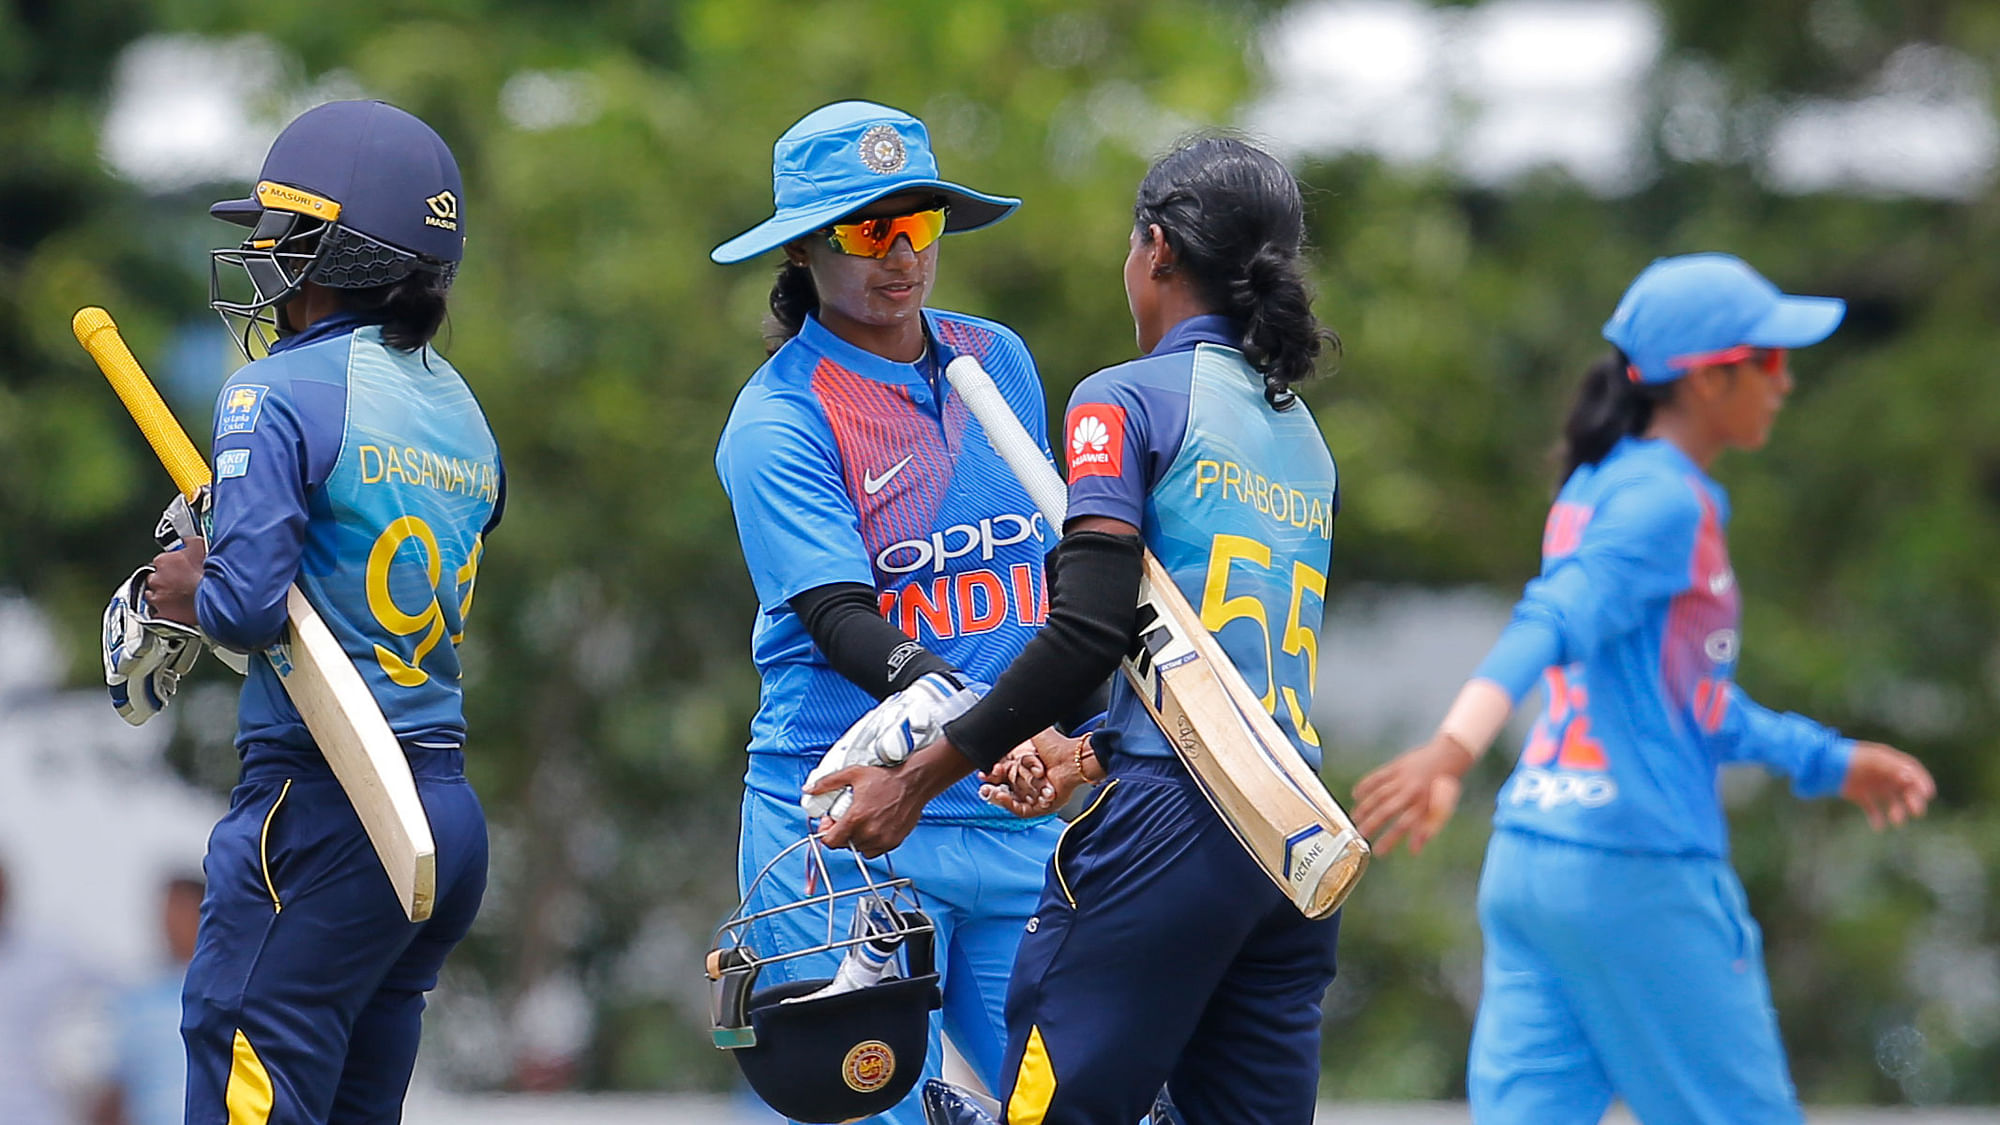 India beat Sri Lanka by 7 wickets in the fourth T20 to take an unassailable 3-0 lead.